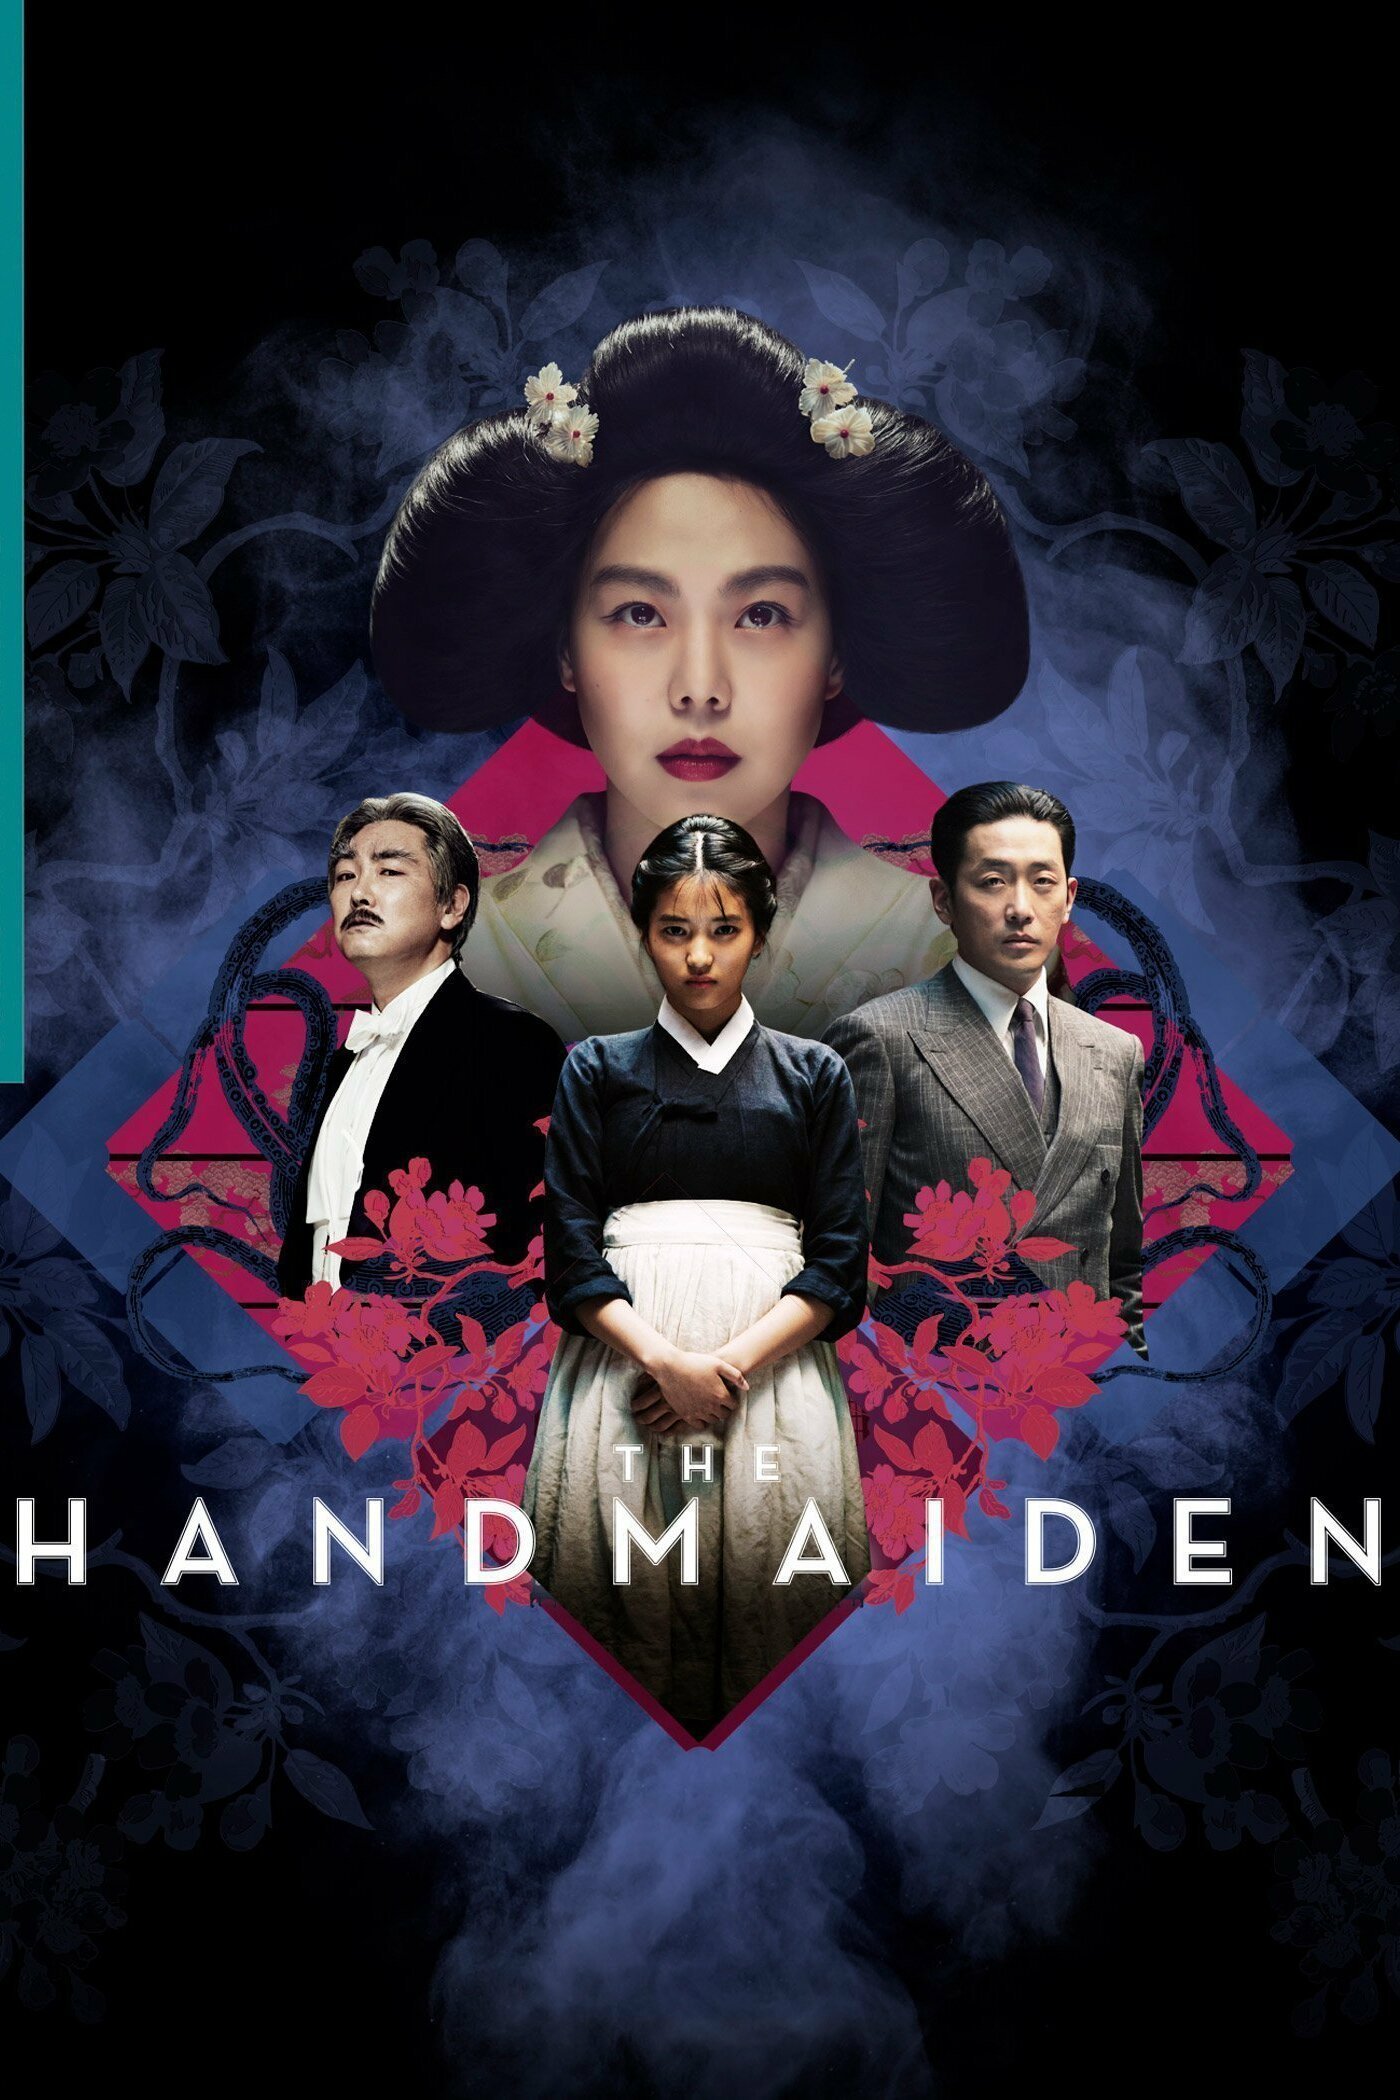 didine love recommends The Handmaiden English Subtitles